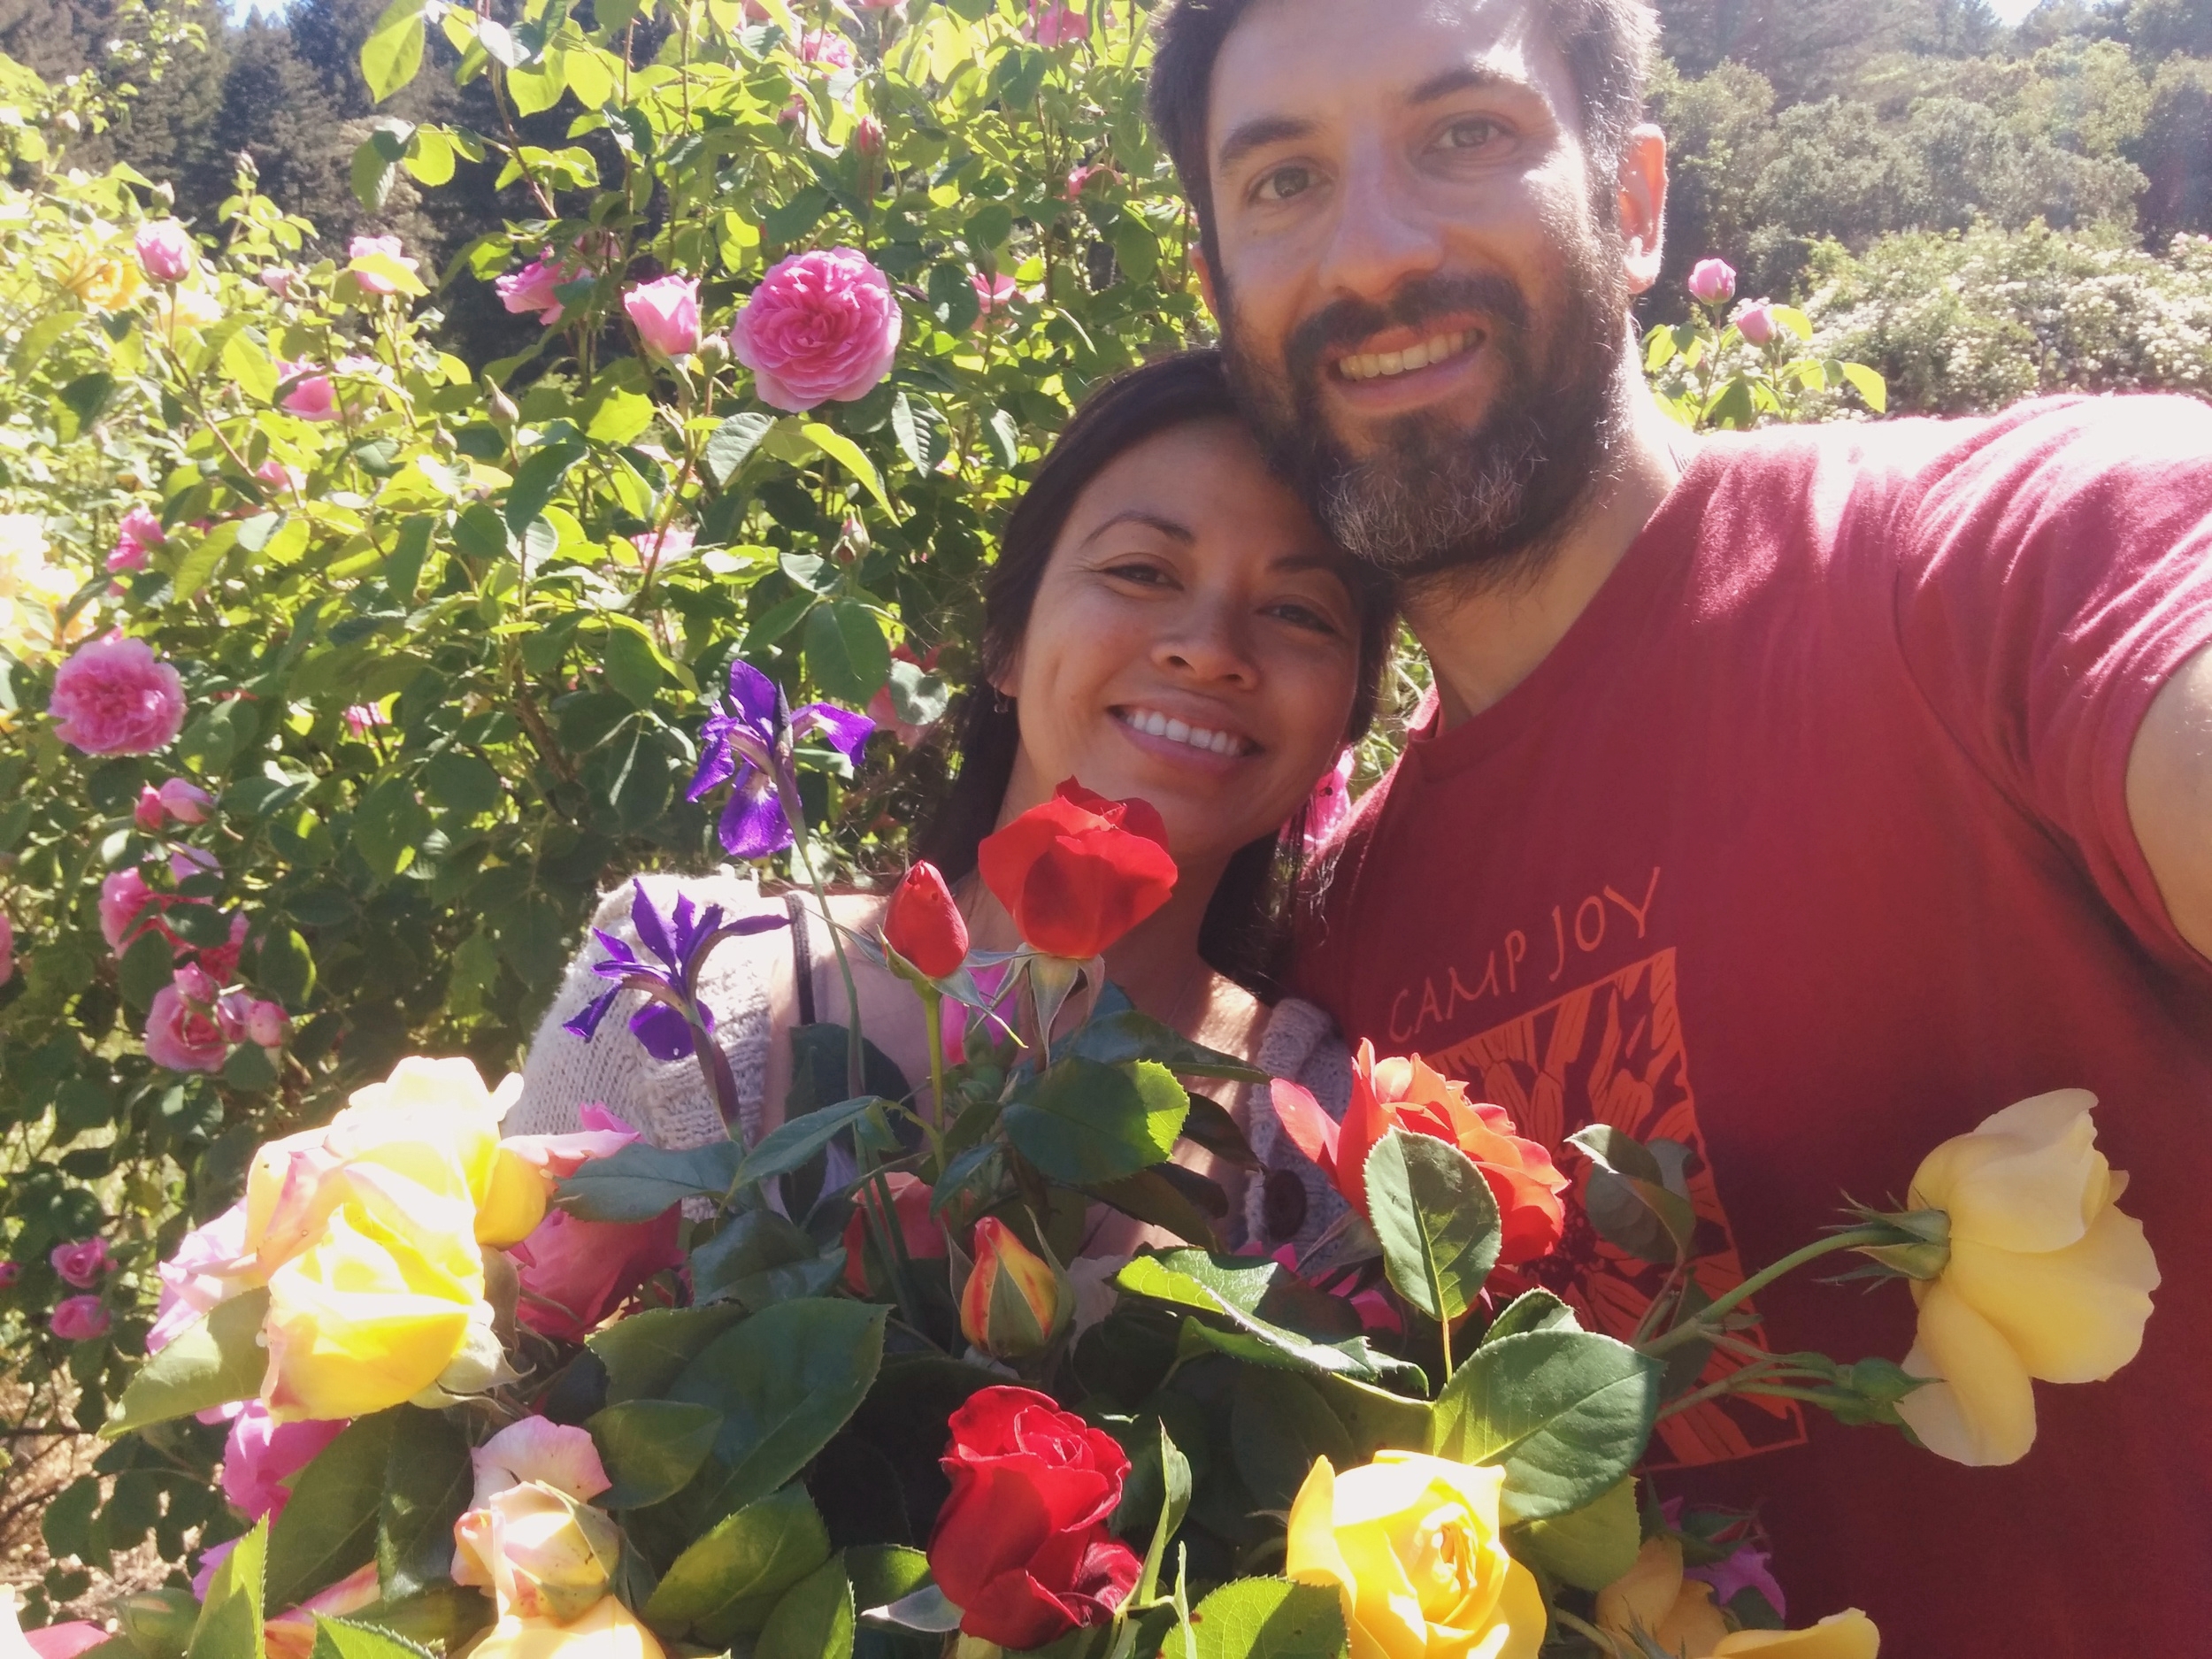 Roses and love on the homestead